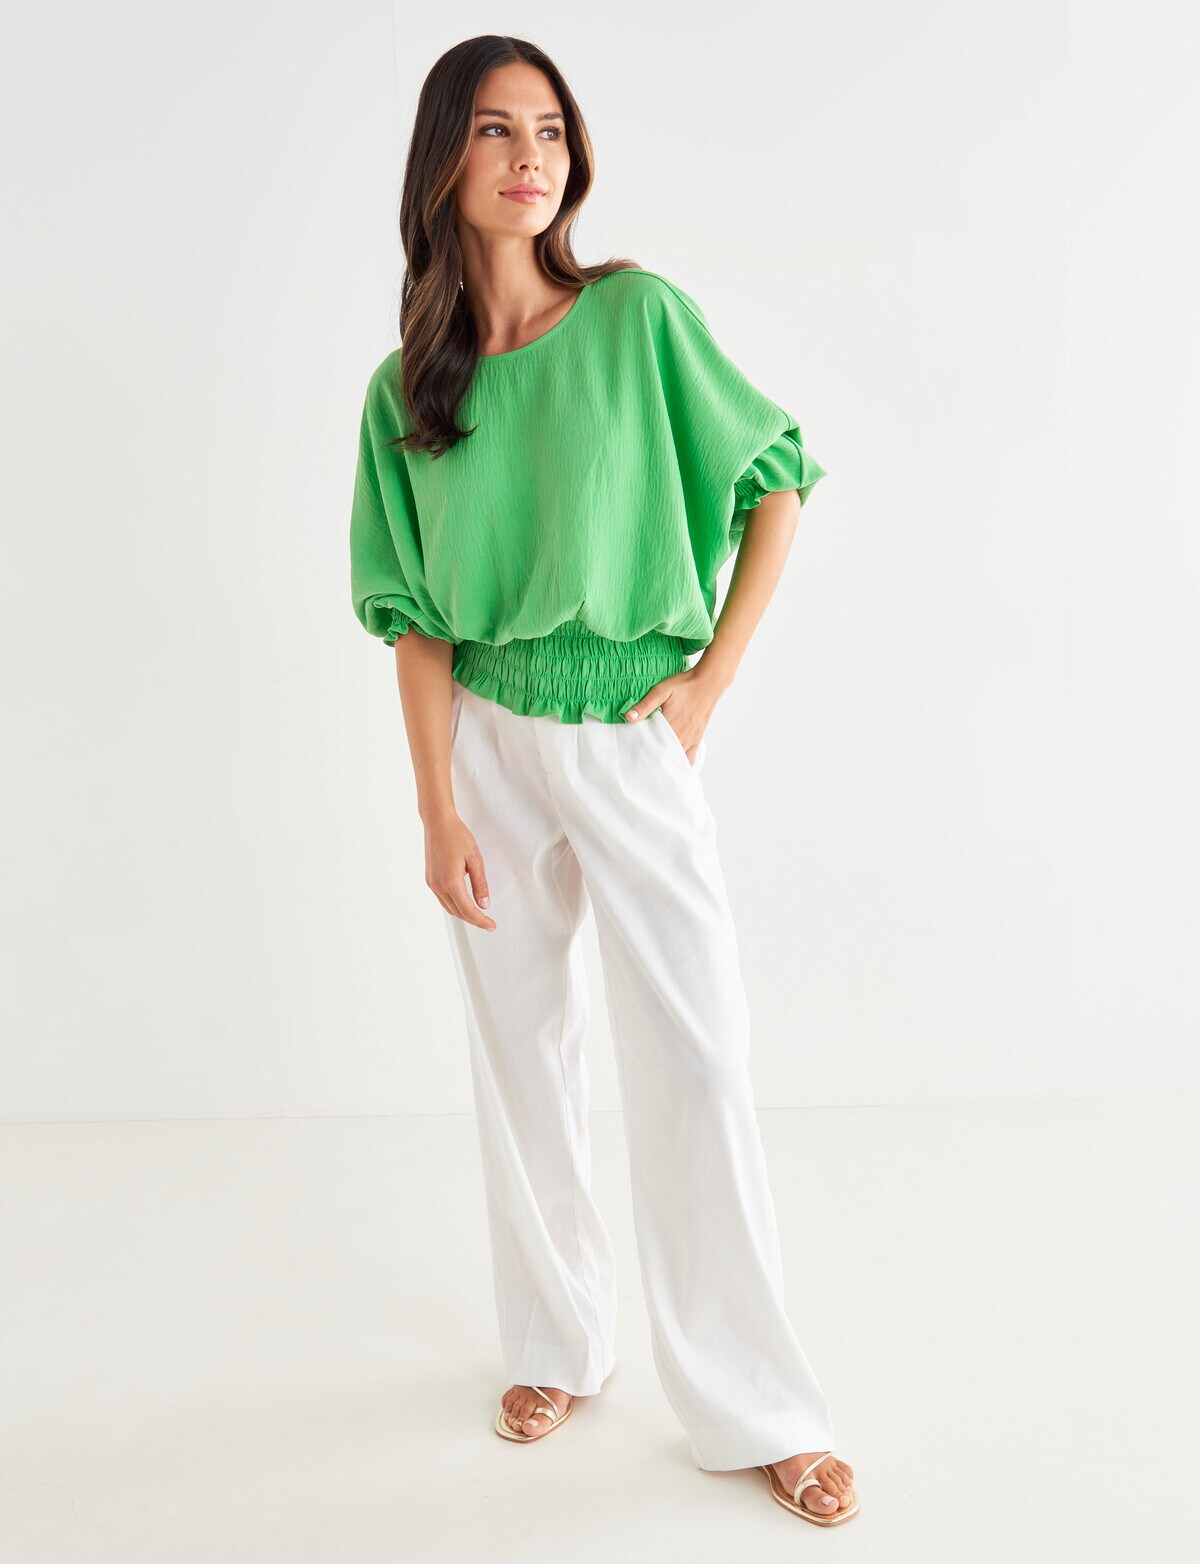 Whistle 3/4 Sleeve Shirred Hem Top, Lime - Tops